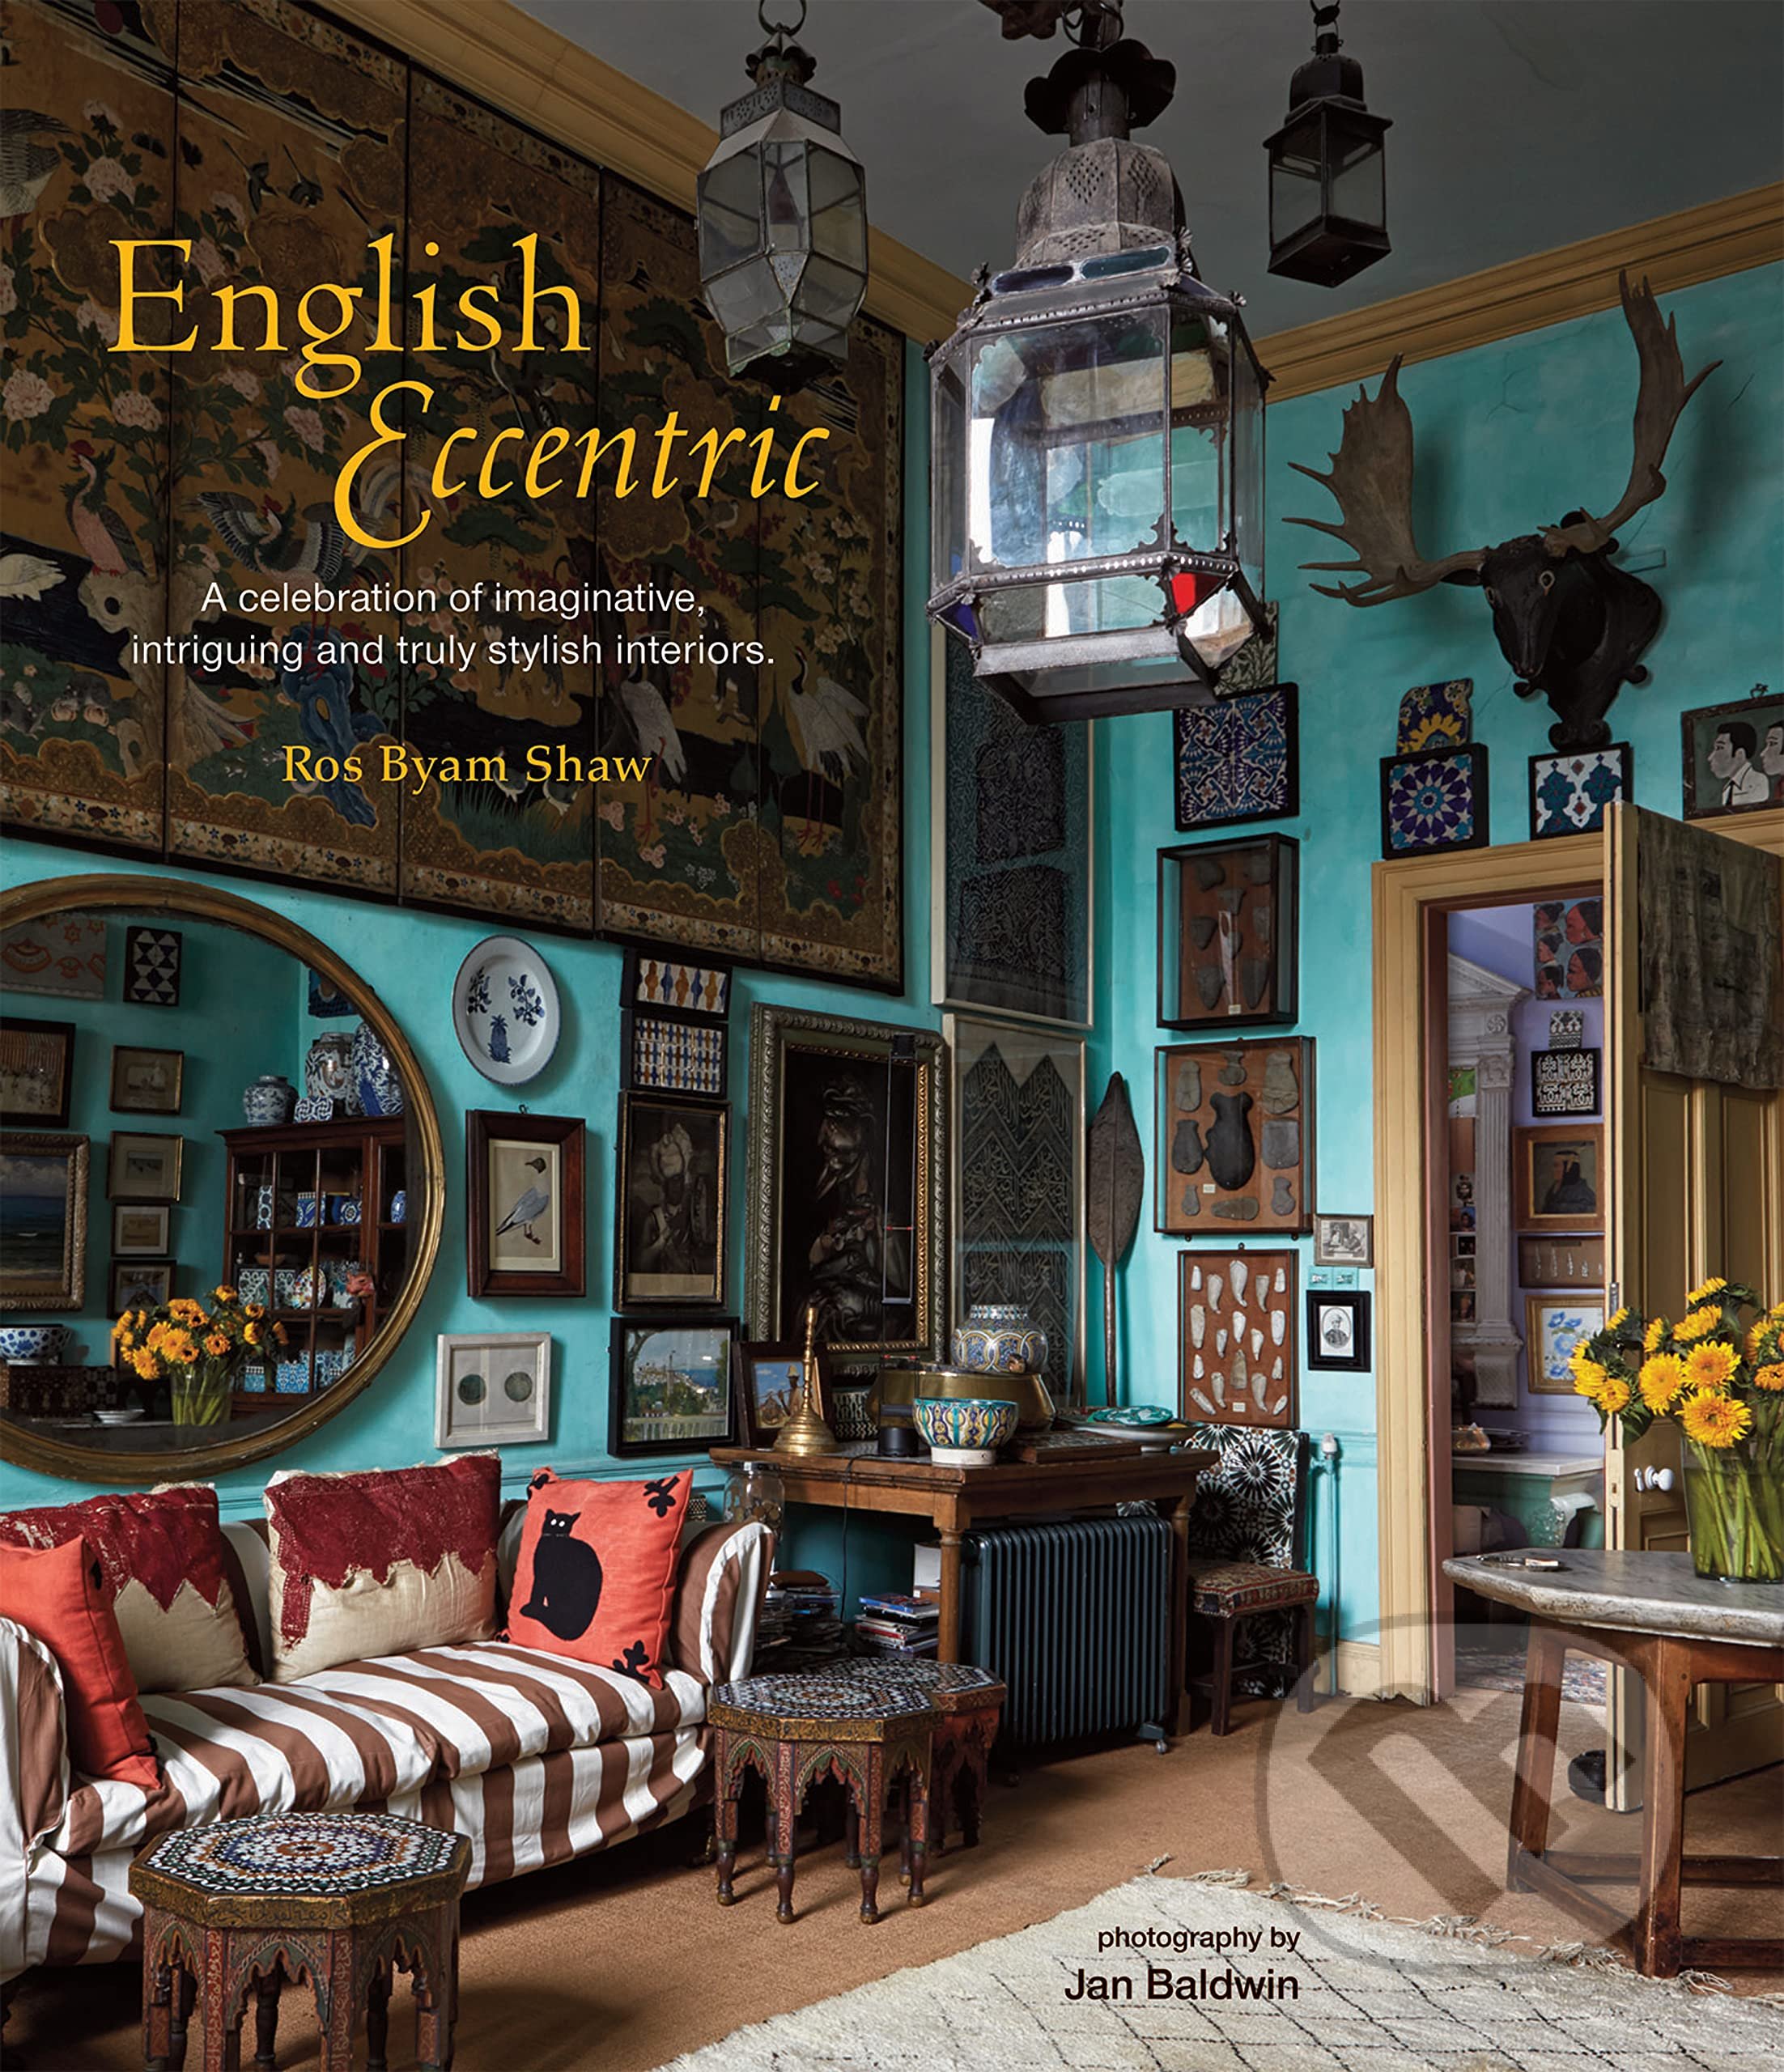 English Eccentric - Ros Byam Shaw, Ryland, Peters and Small, 2016